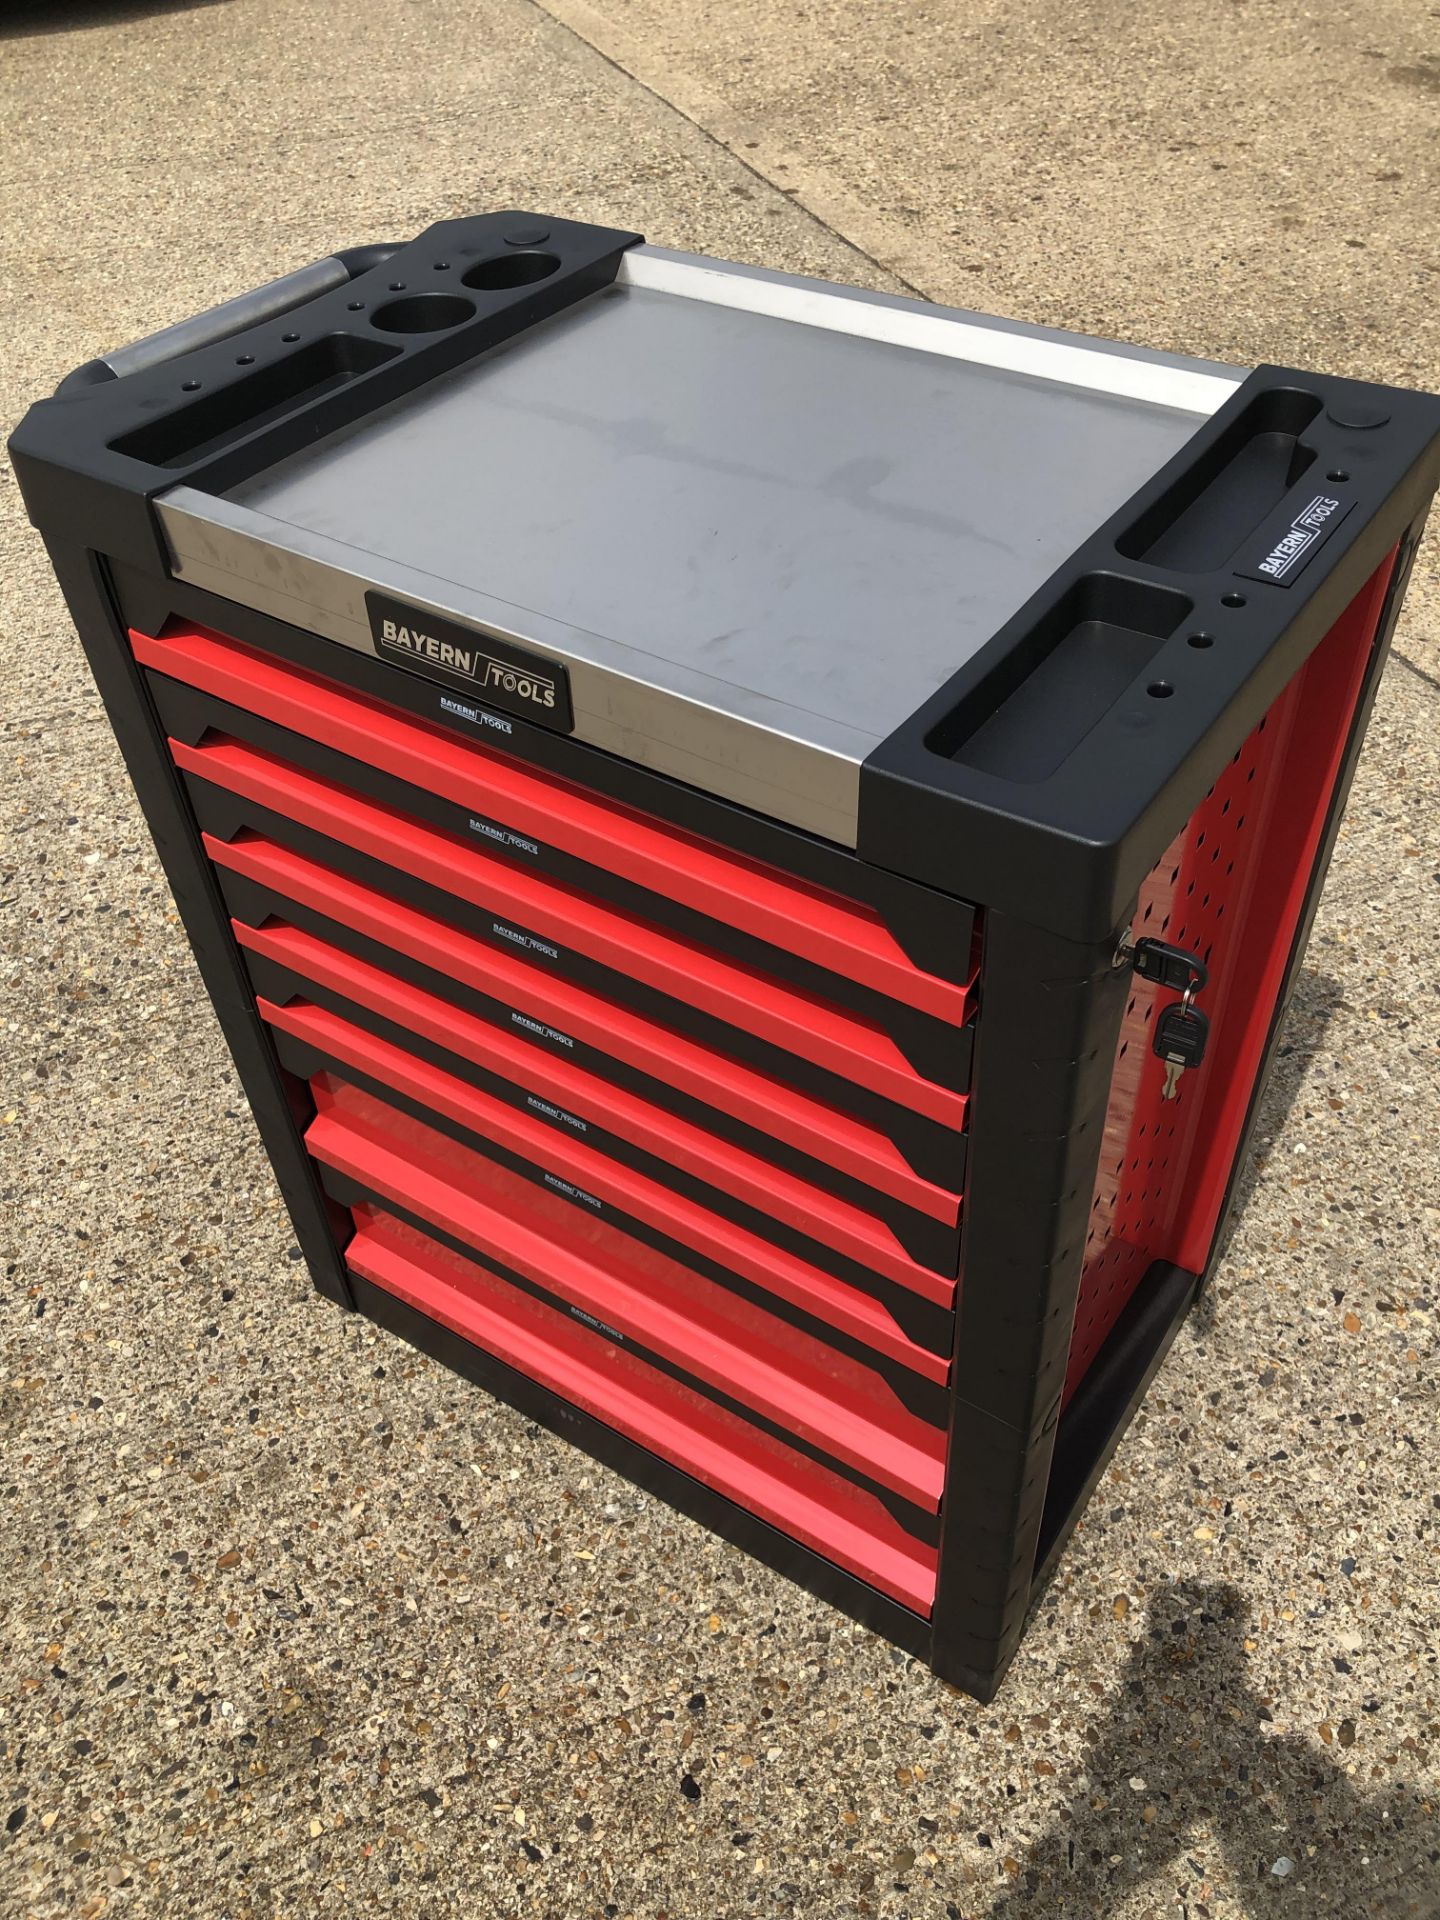 V Brand New Professional Locking Garage Tool Trolley/Cabinet (Red/Blue) with Metal Top and 7 Drawers - Image 2 of 8